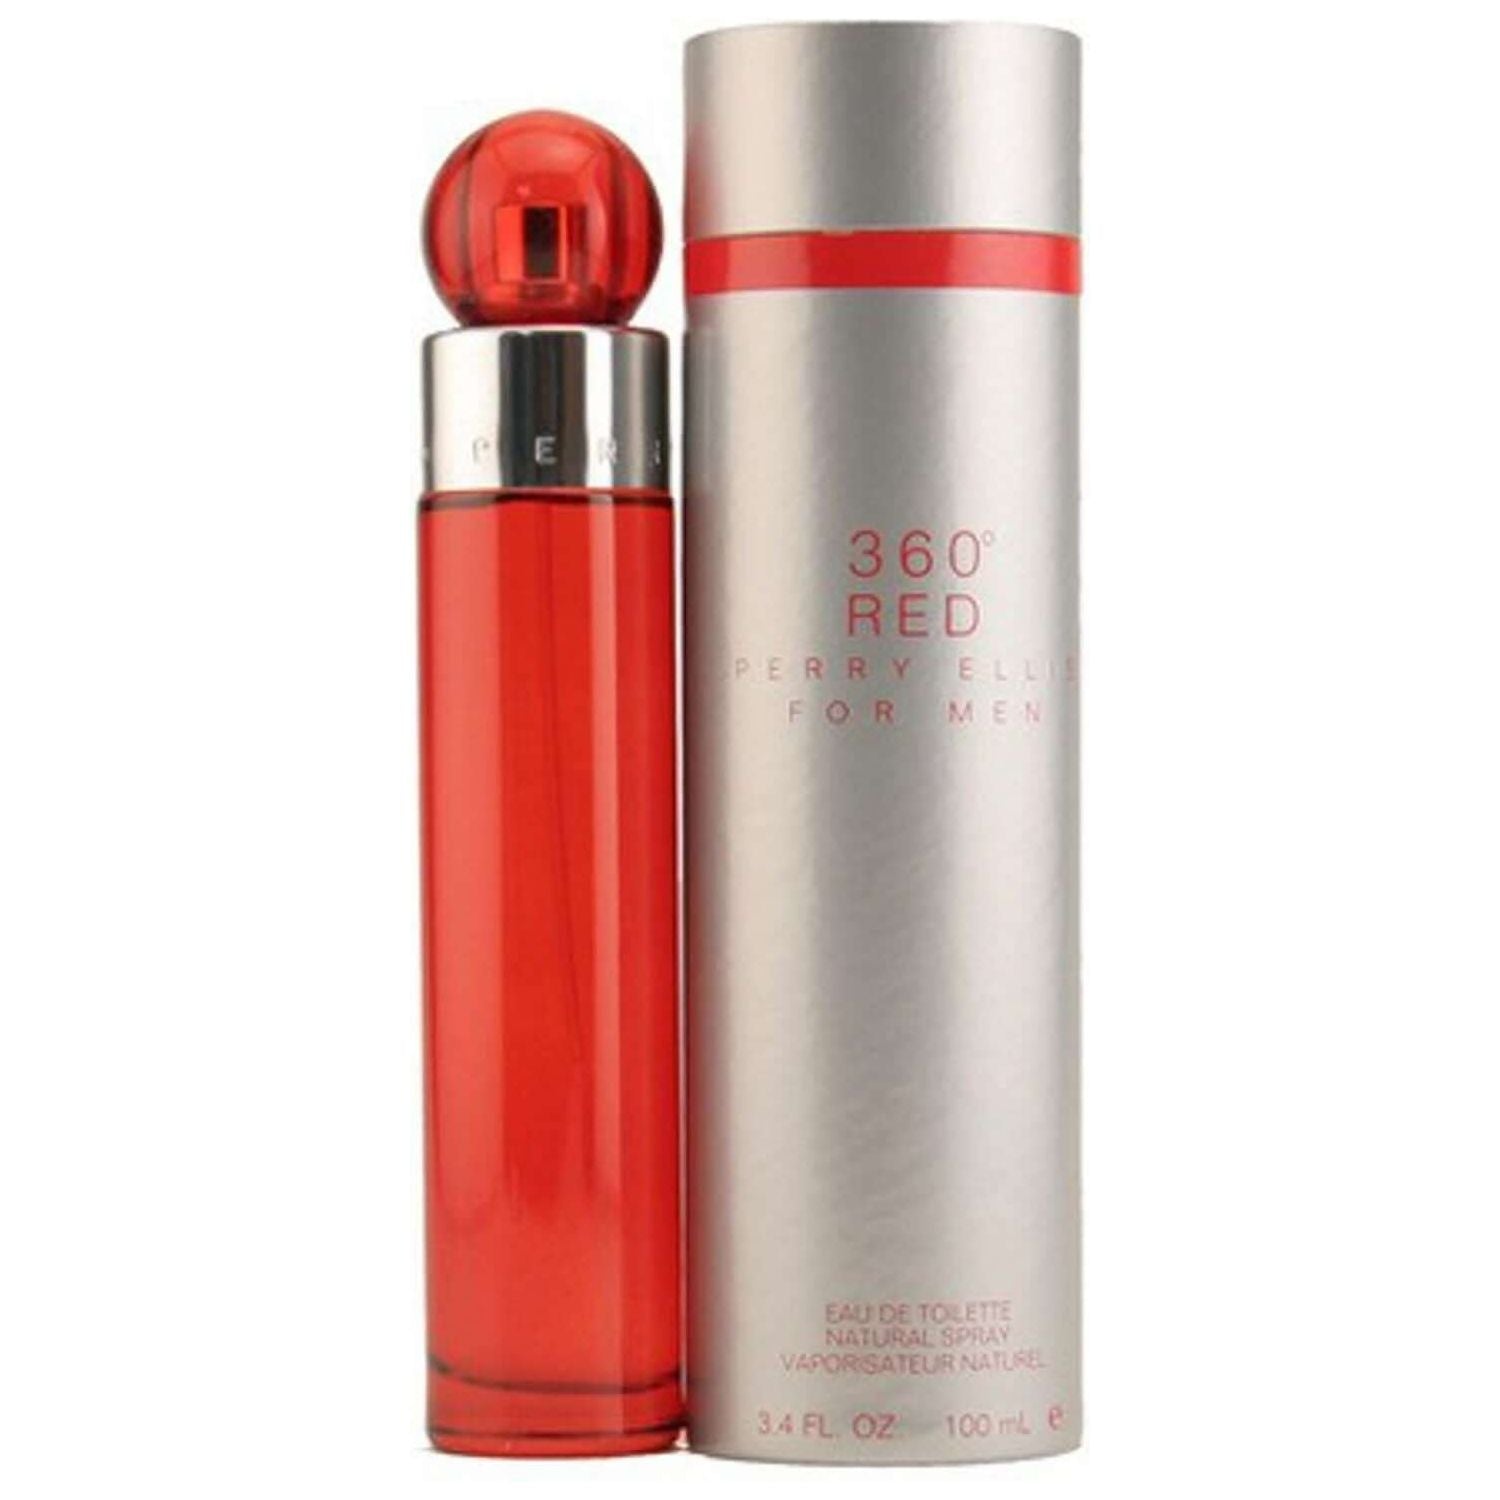 360 Red by Perry Ellis 3.4 oz Cologne for Men